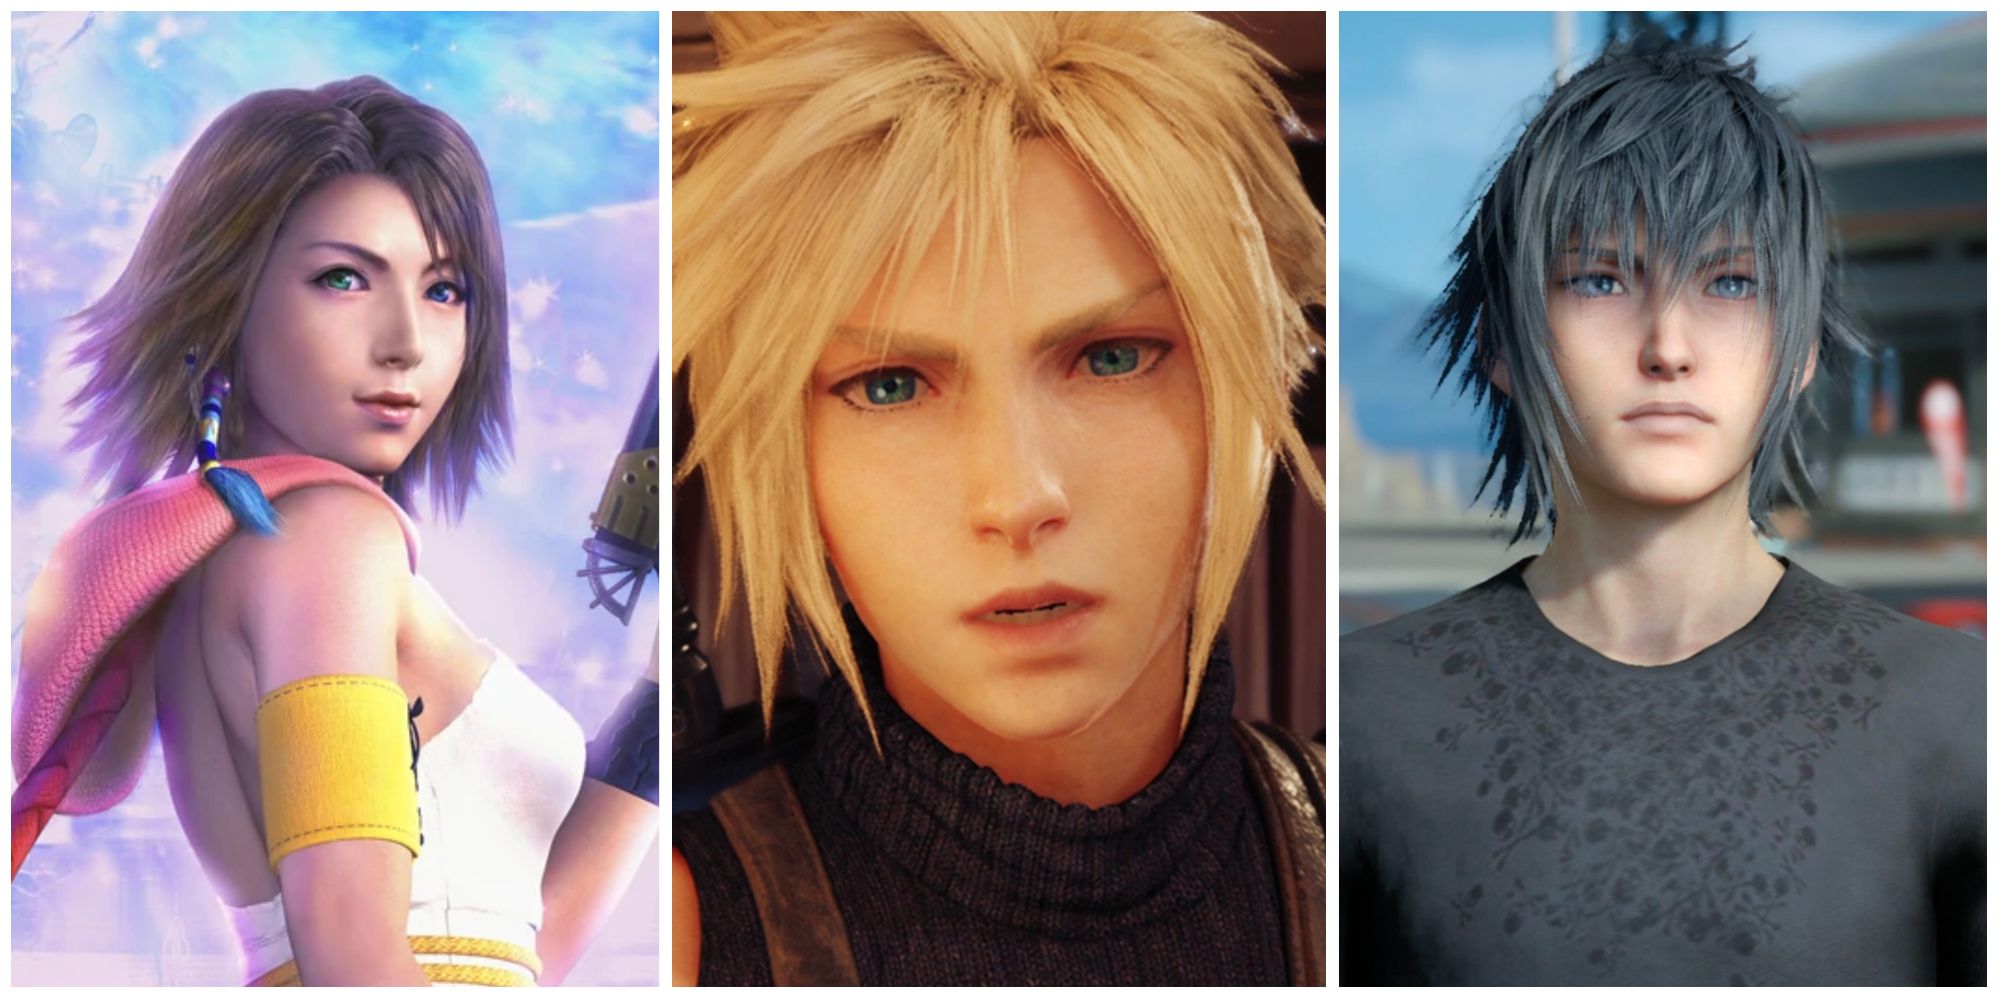 Final Fantasy: The Main Characters Who Change The Most During Their Stories